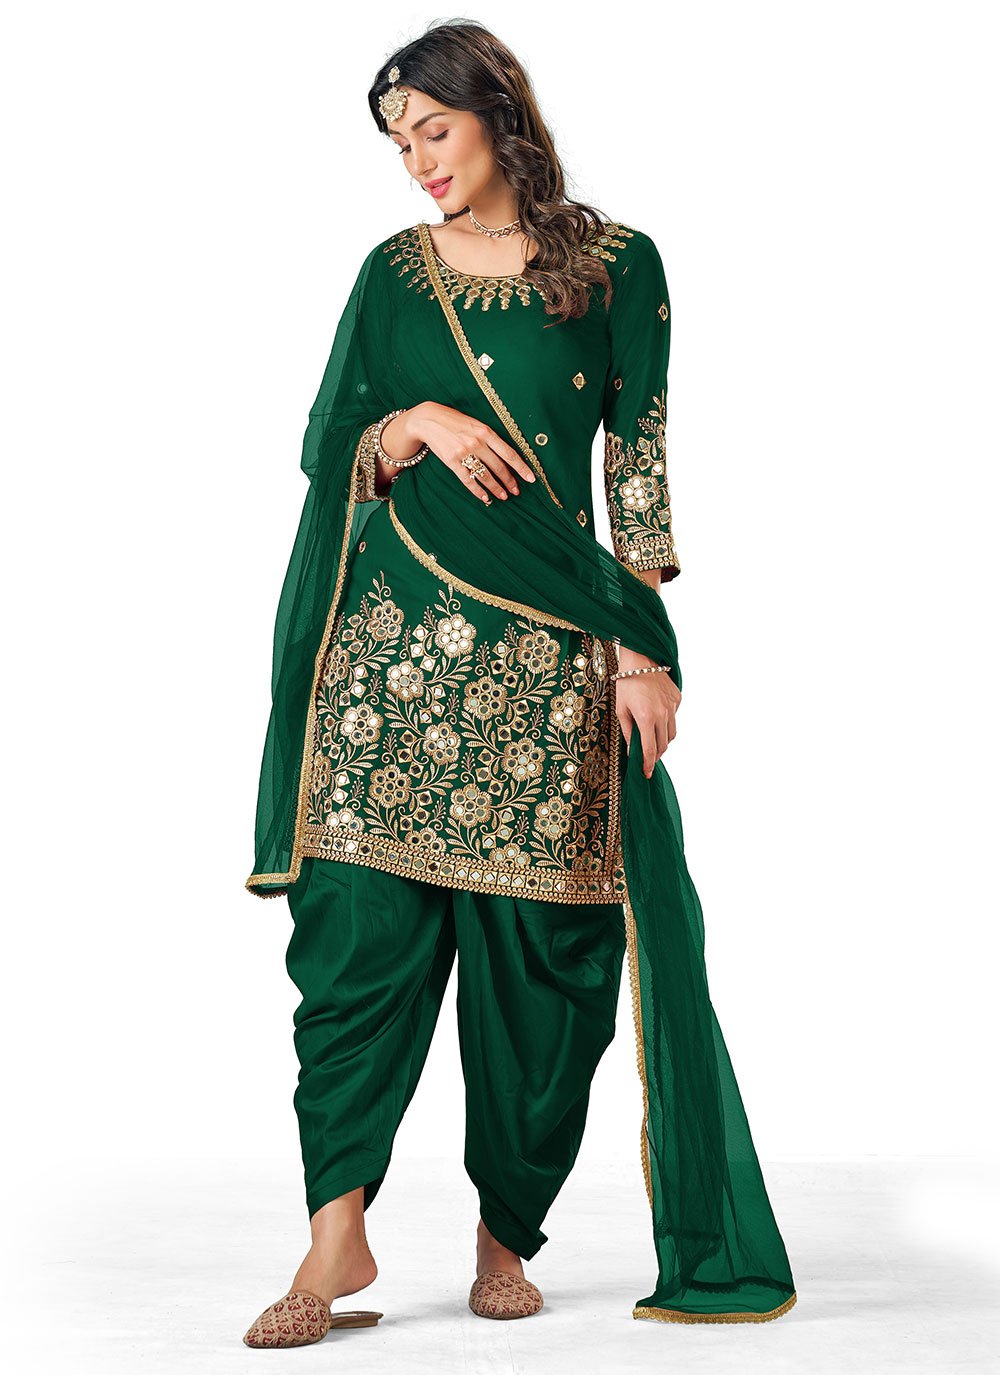 Punjabi Party Wear Suits that Fuse Tradition with Trend!